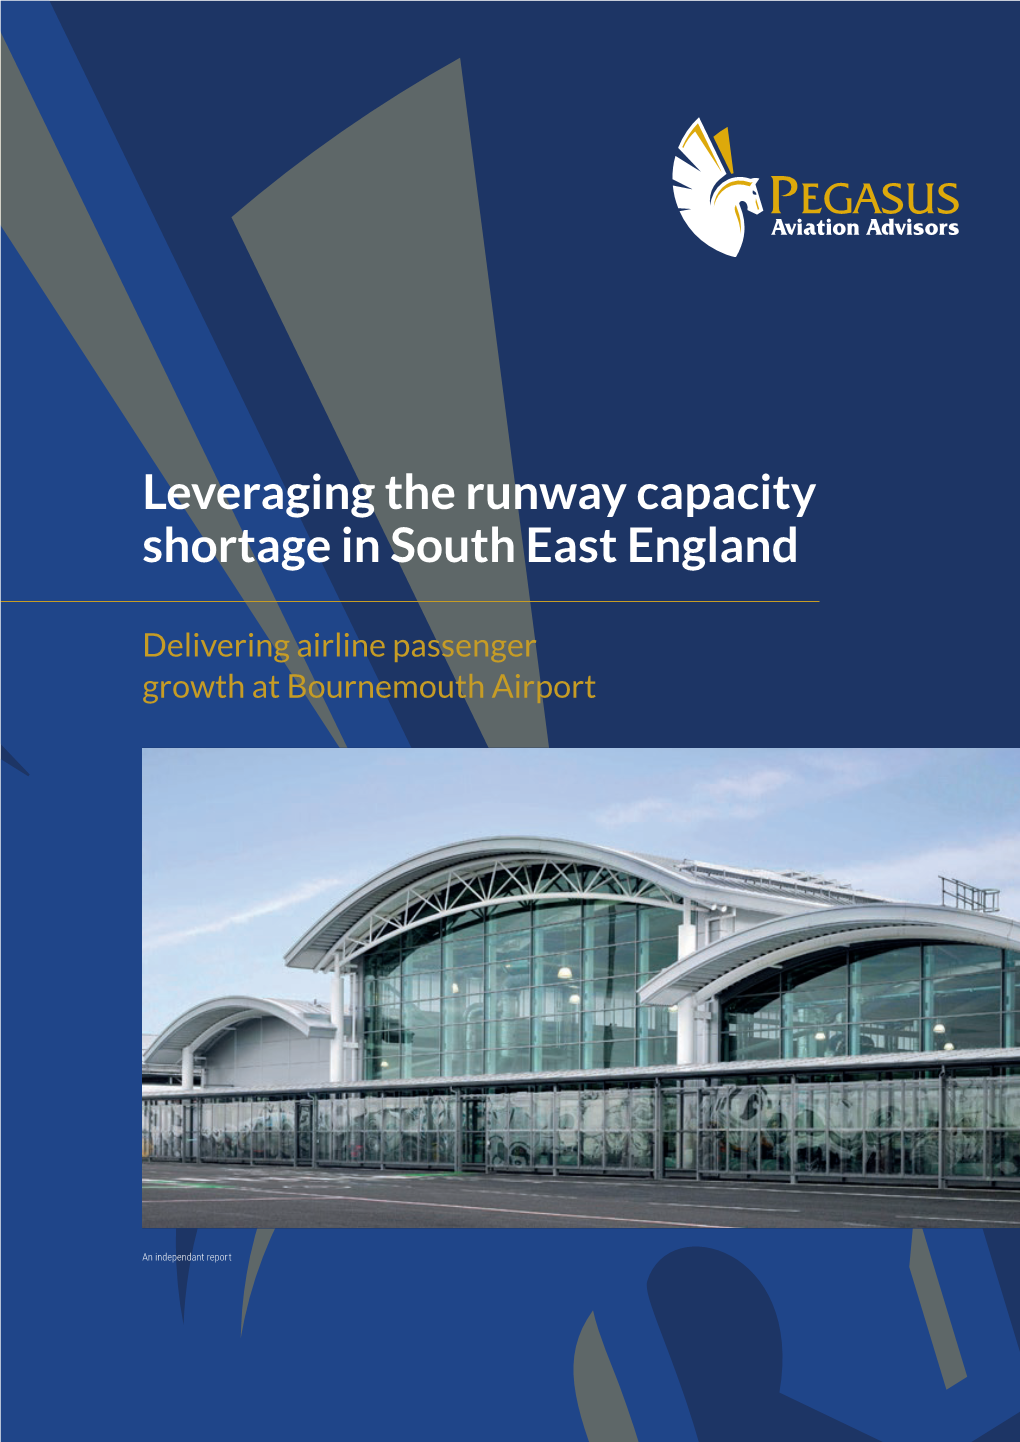 Leveraging the Runway Capacity Shortage in South East England